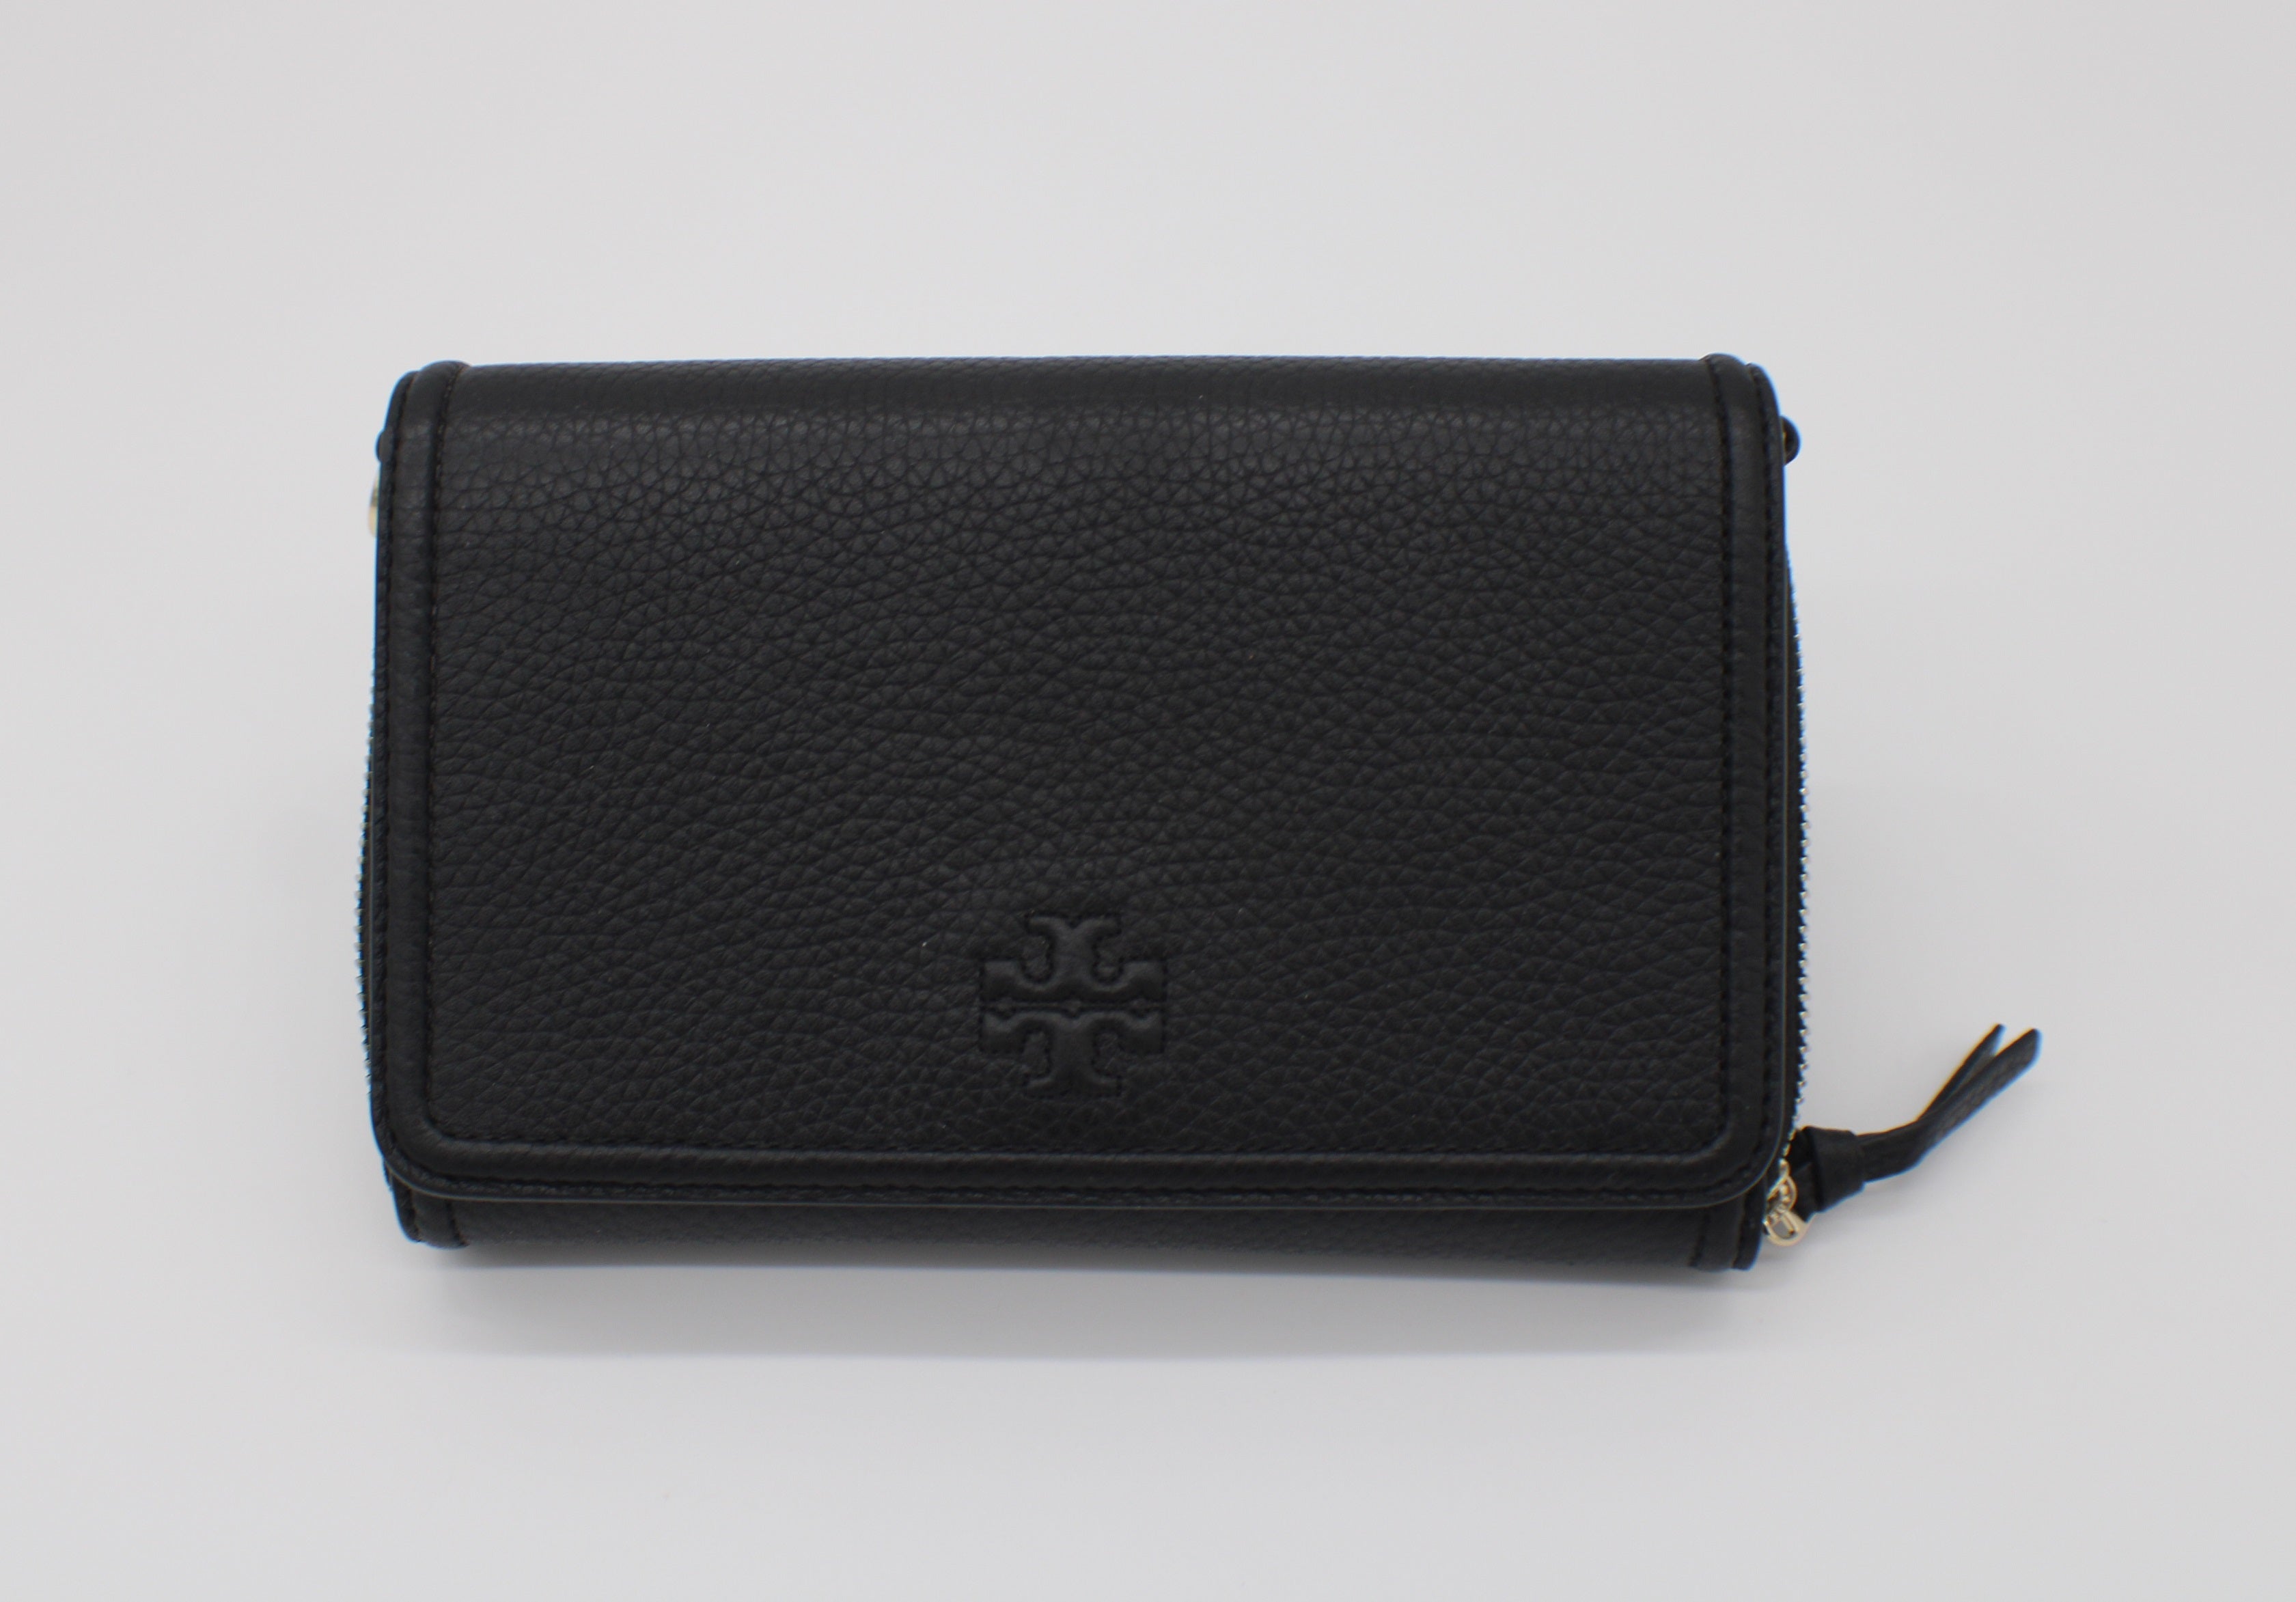 Tory Burch Moose Emerson Zip Leather Shoulder Bag, Best Price and Reviews